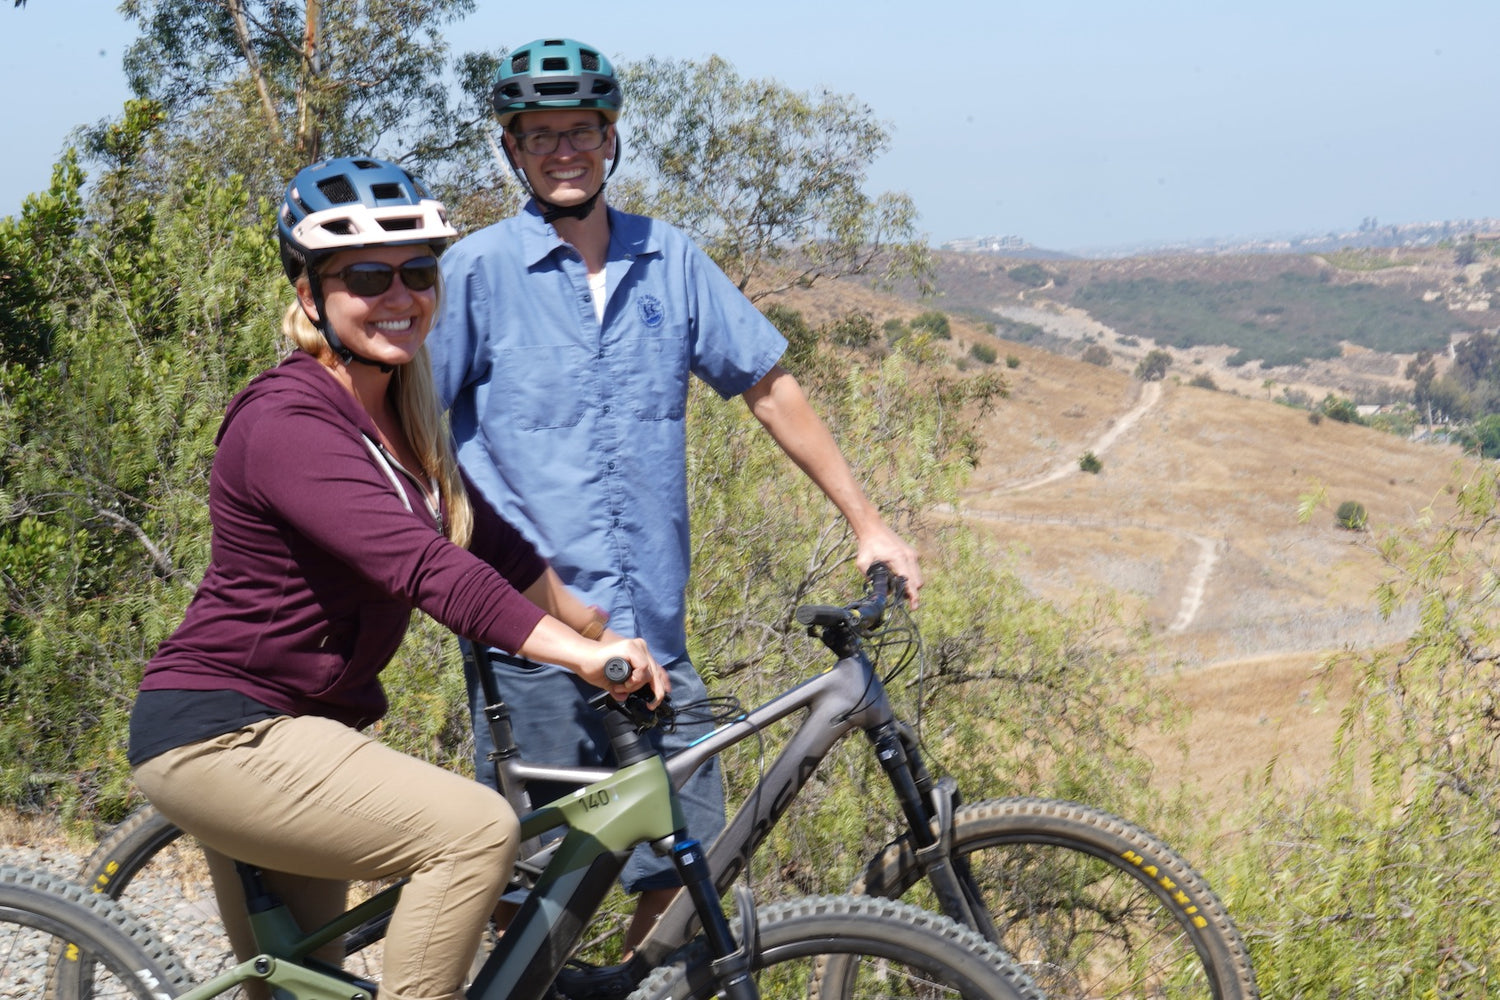 Electric bike test rides in Poway at San Diego Fly Rides